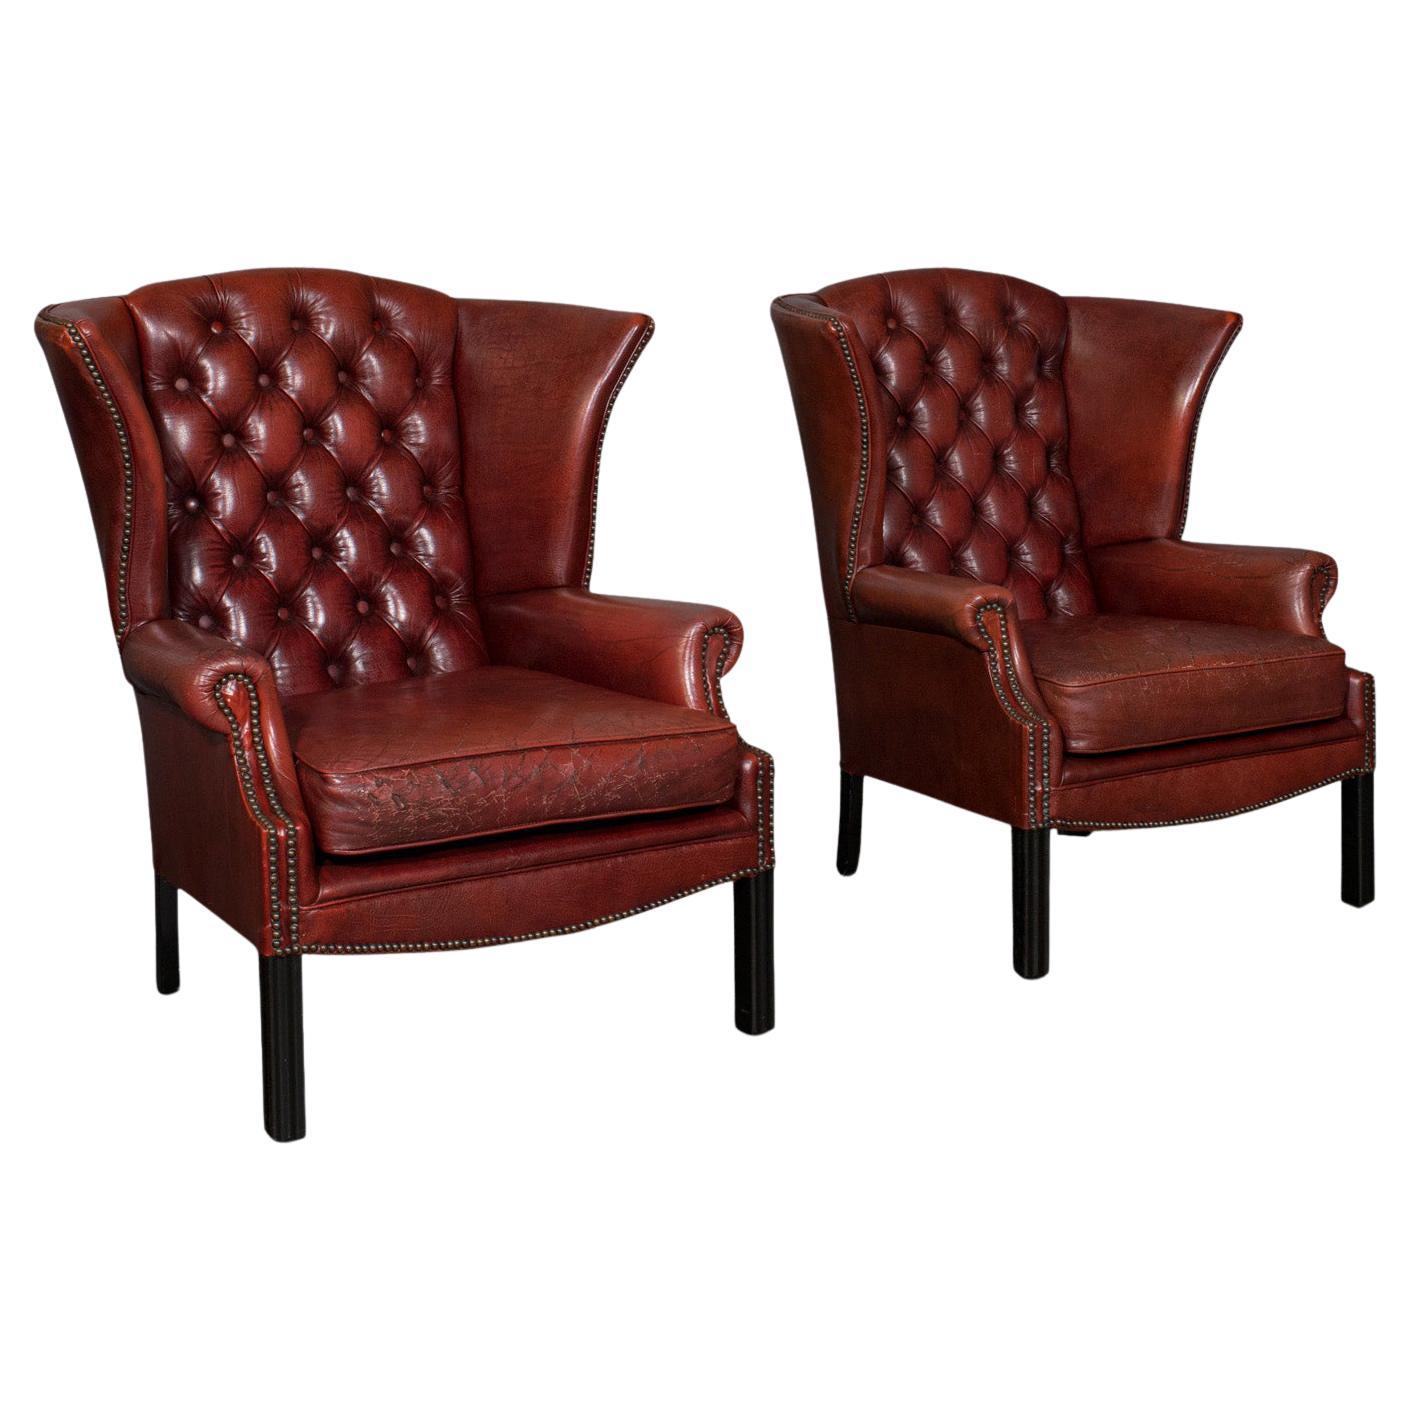 Pair of Vintage Clubhouse Wingback Chairs, English, Leather, Armchair, C.1950 For Sale